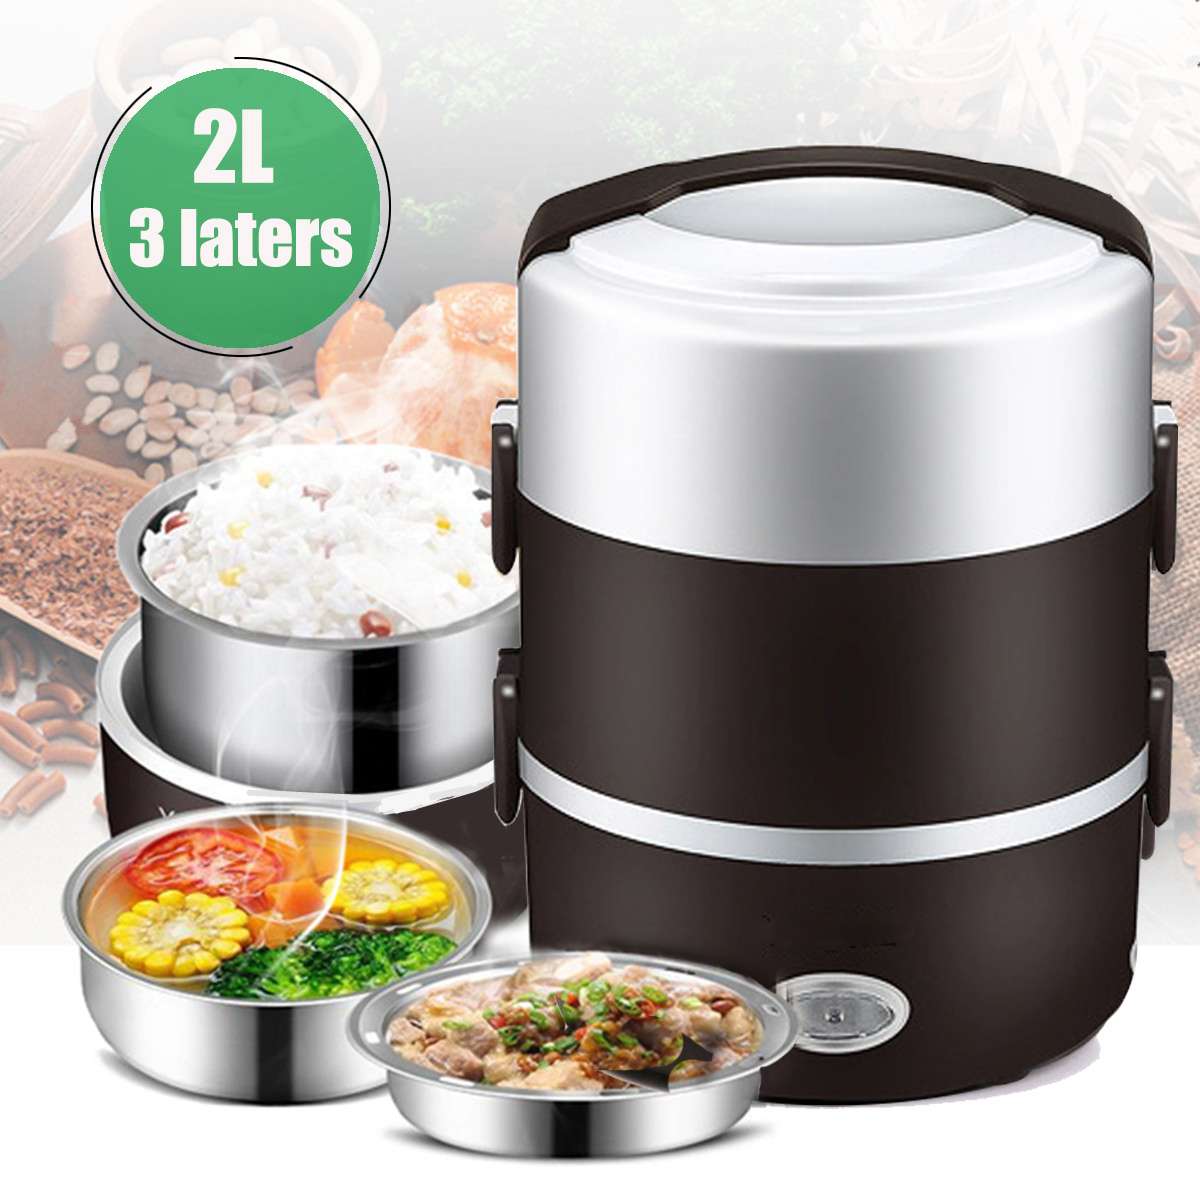 2L 3 Layer Portable Lunch Box Mini Electric Rice Cooker Steamer Meal Thermal Heating Automatic Food Container Warmer Cooking Pot